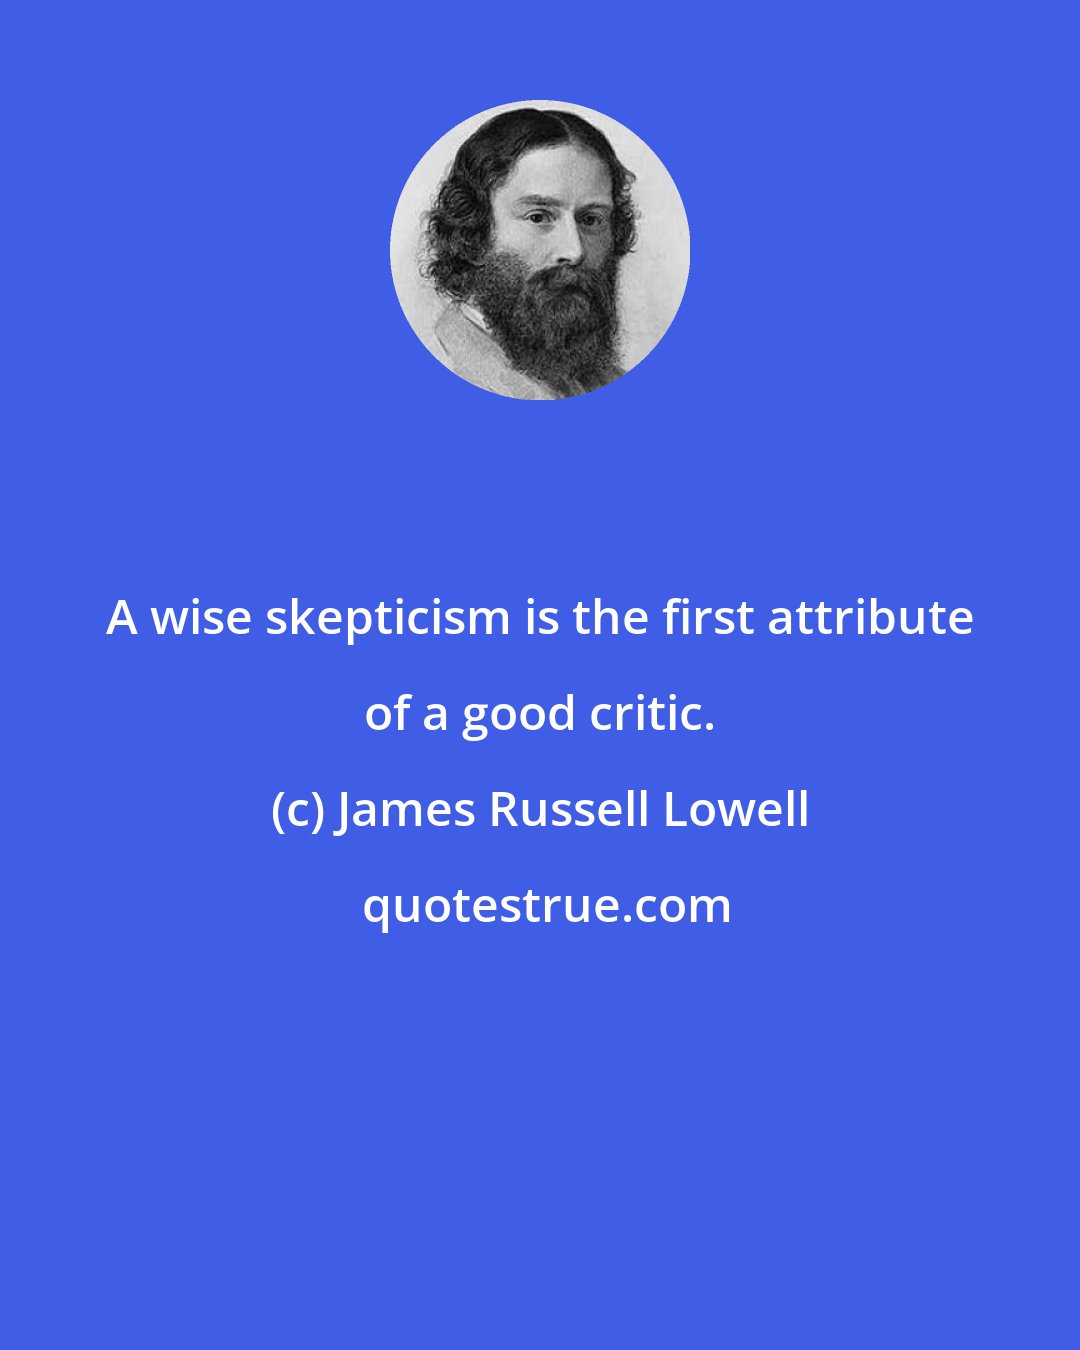 James Russell Lowell: A wise skepticism is the first attribute of a good critic.